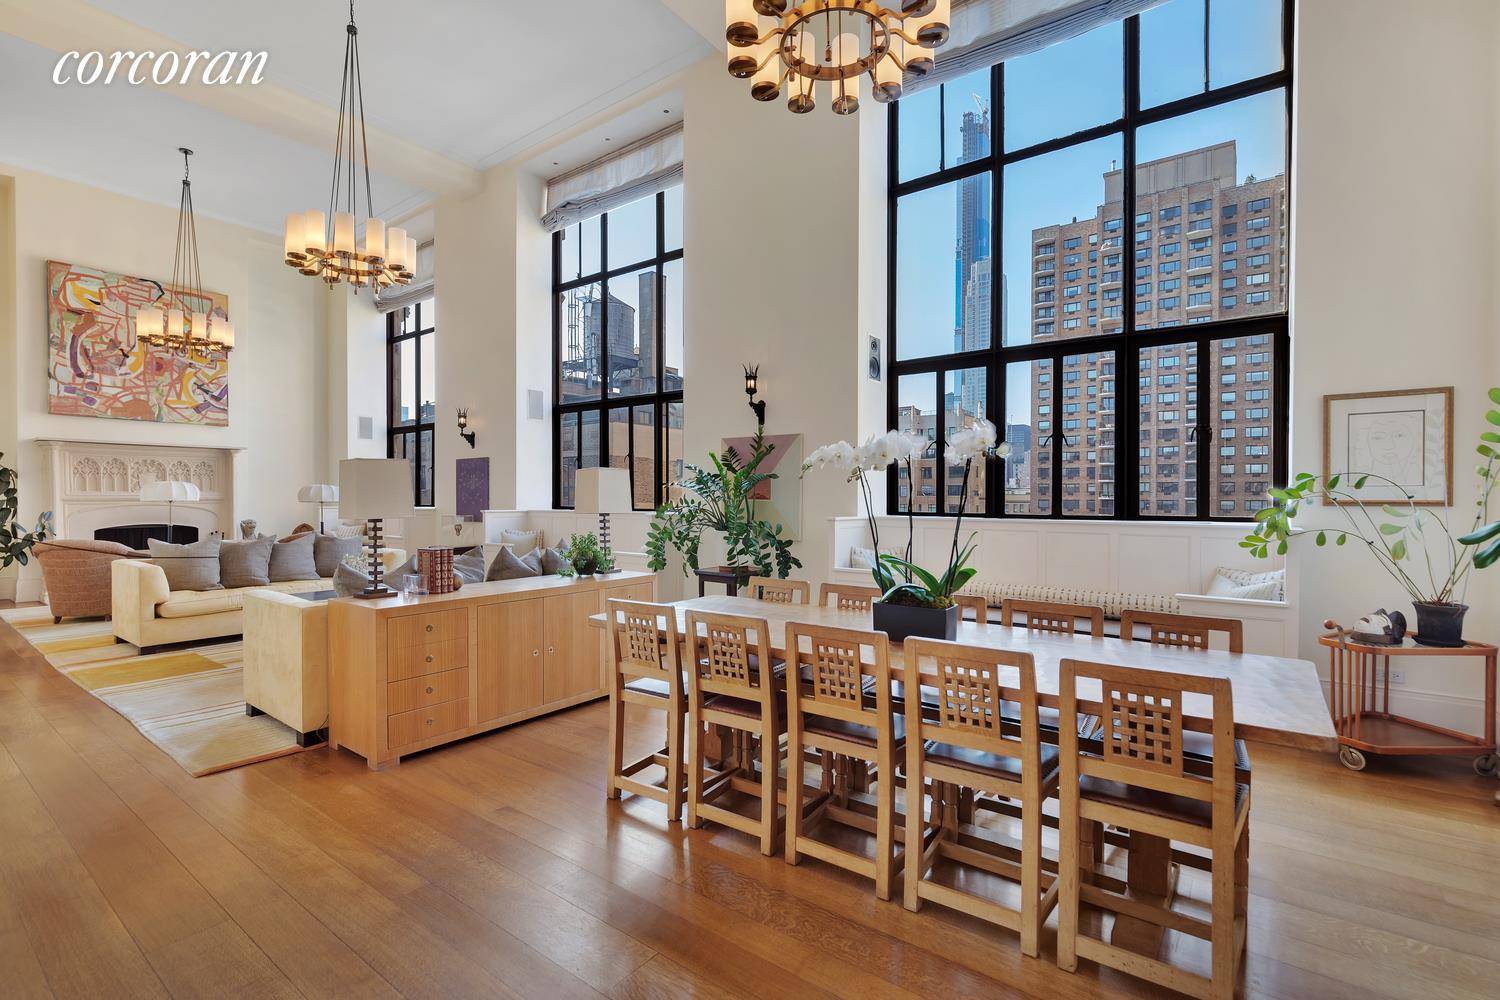 Truly a one of a kind Penthouse triplex at the iconic Hotel Des Artistes on Central Park West ; one of New York City's finest white glove residential cooperatives.